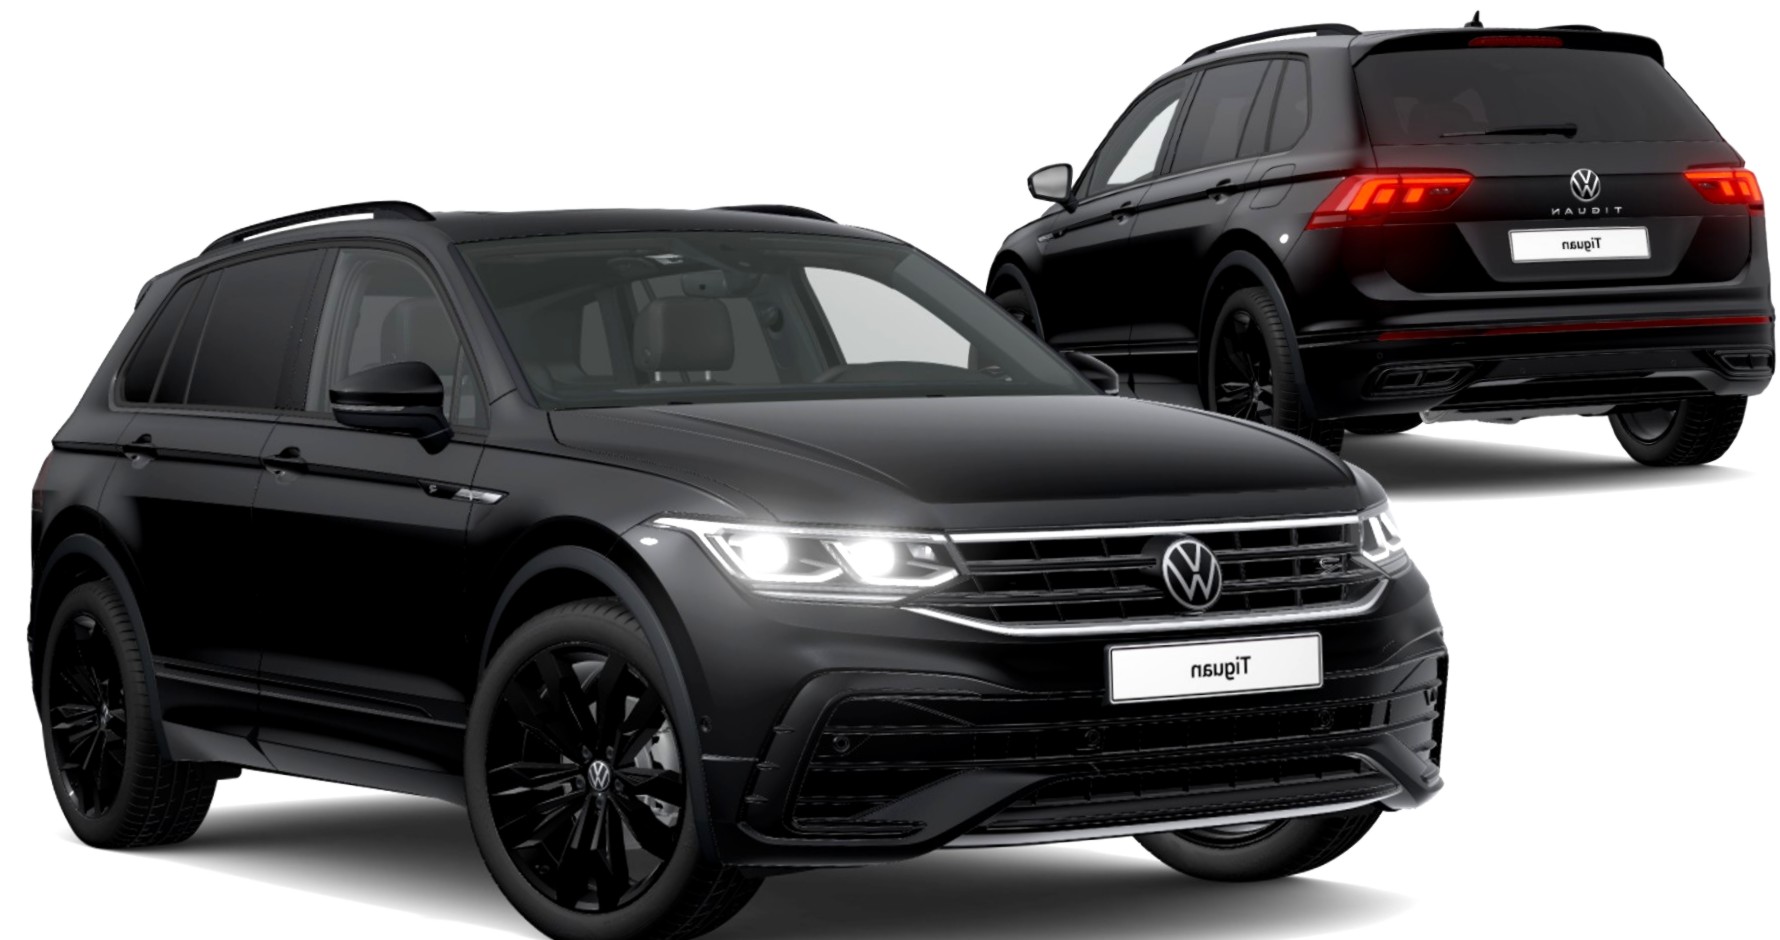 Vw Tiguan Black Edition Is The New Sinister Looking Flagship Trim